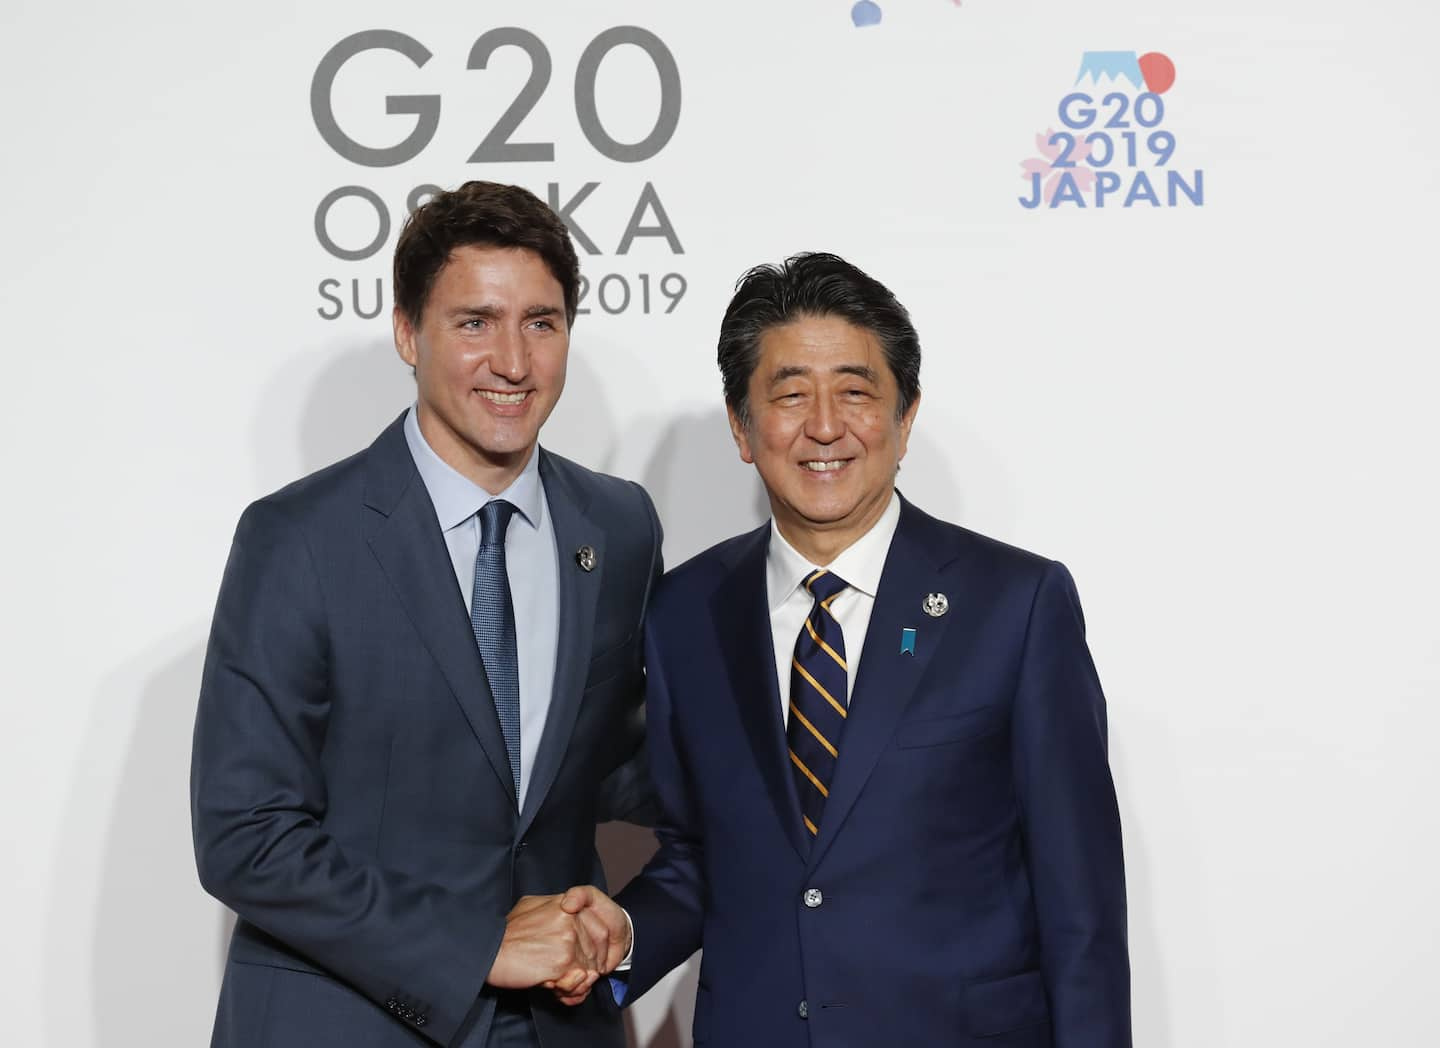 Assassination of Shinzo Abe: “We will miss you, my friend”, says Justin Trudeau